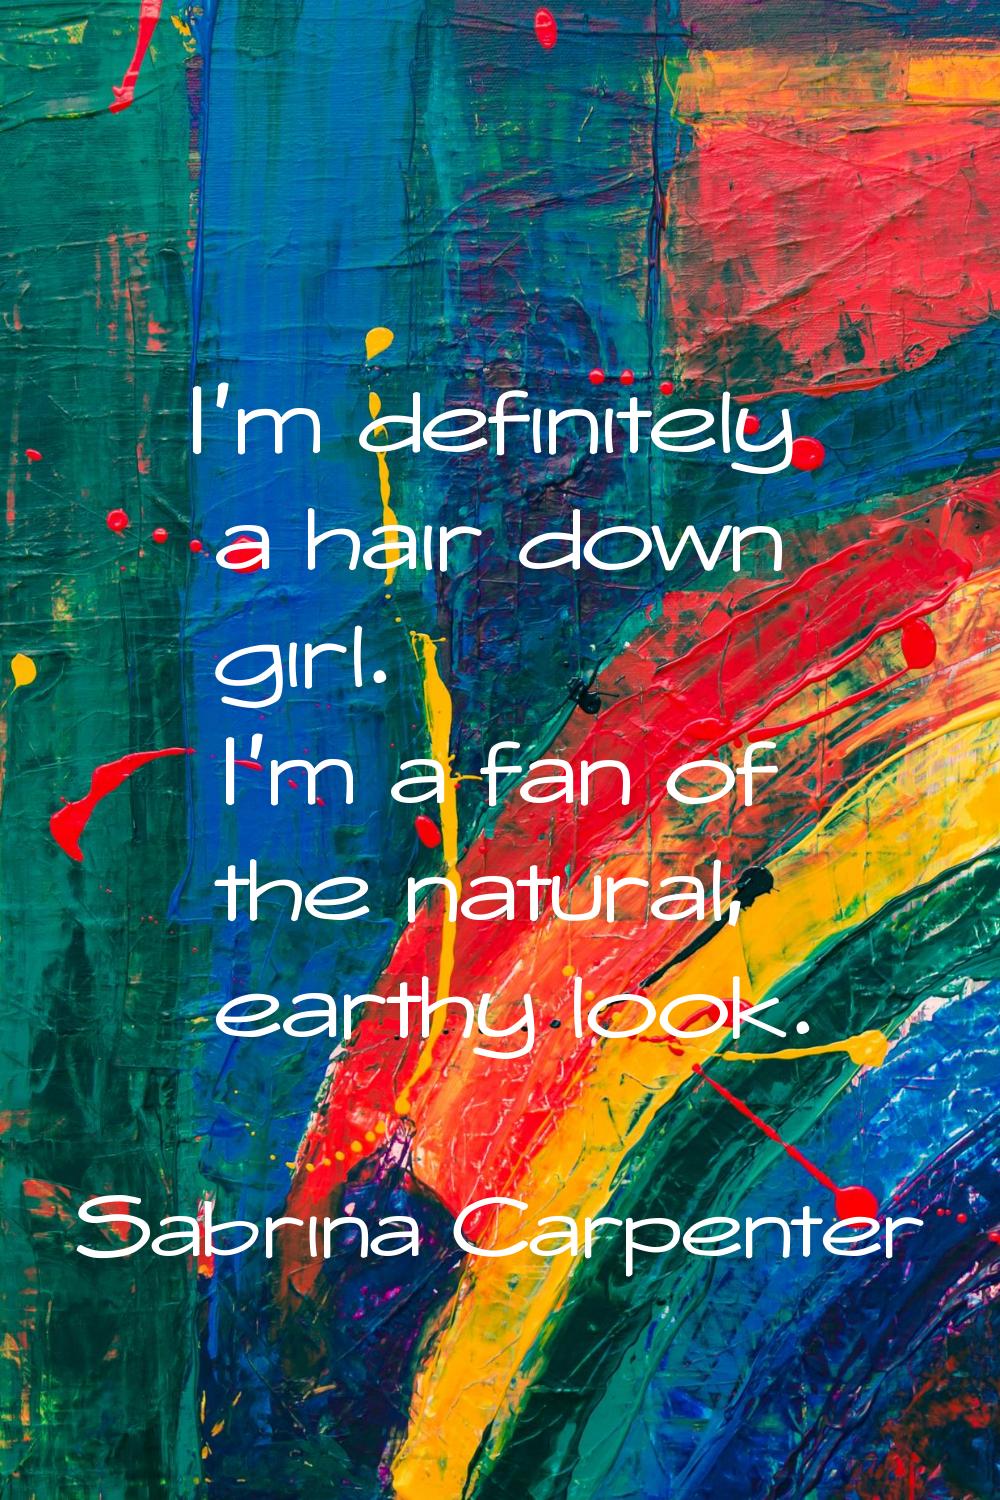 I'm definitely a hair down girl. I'm a fan of the natural, earthy look.